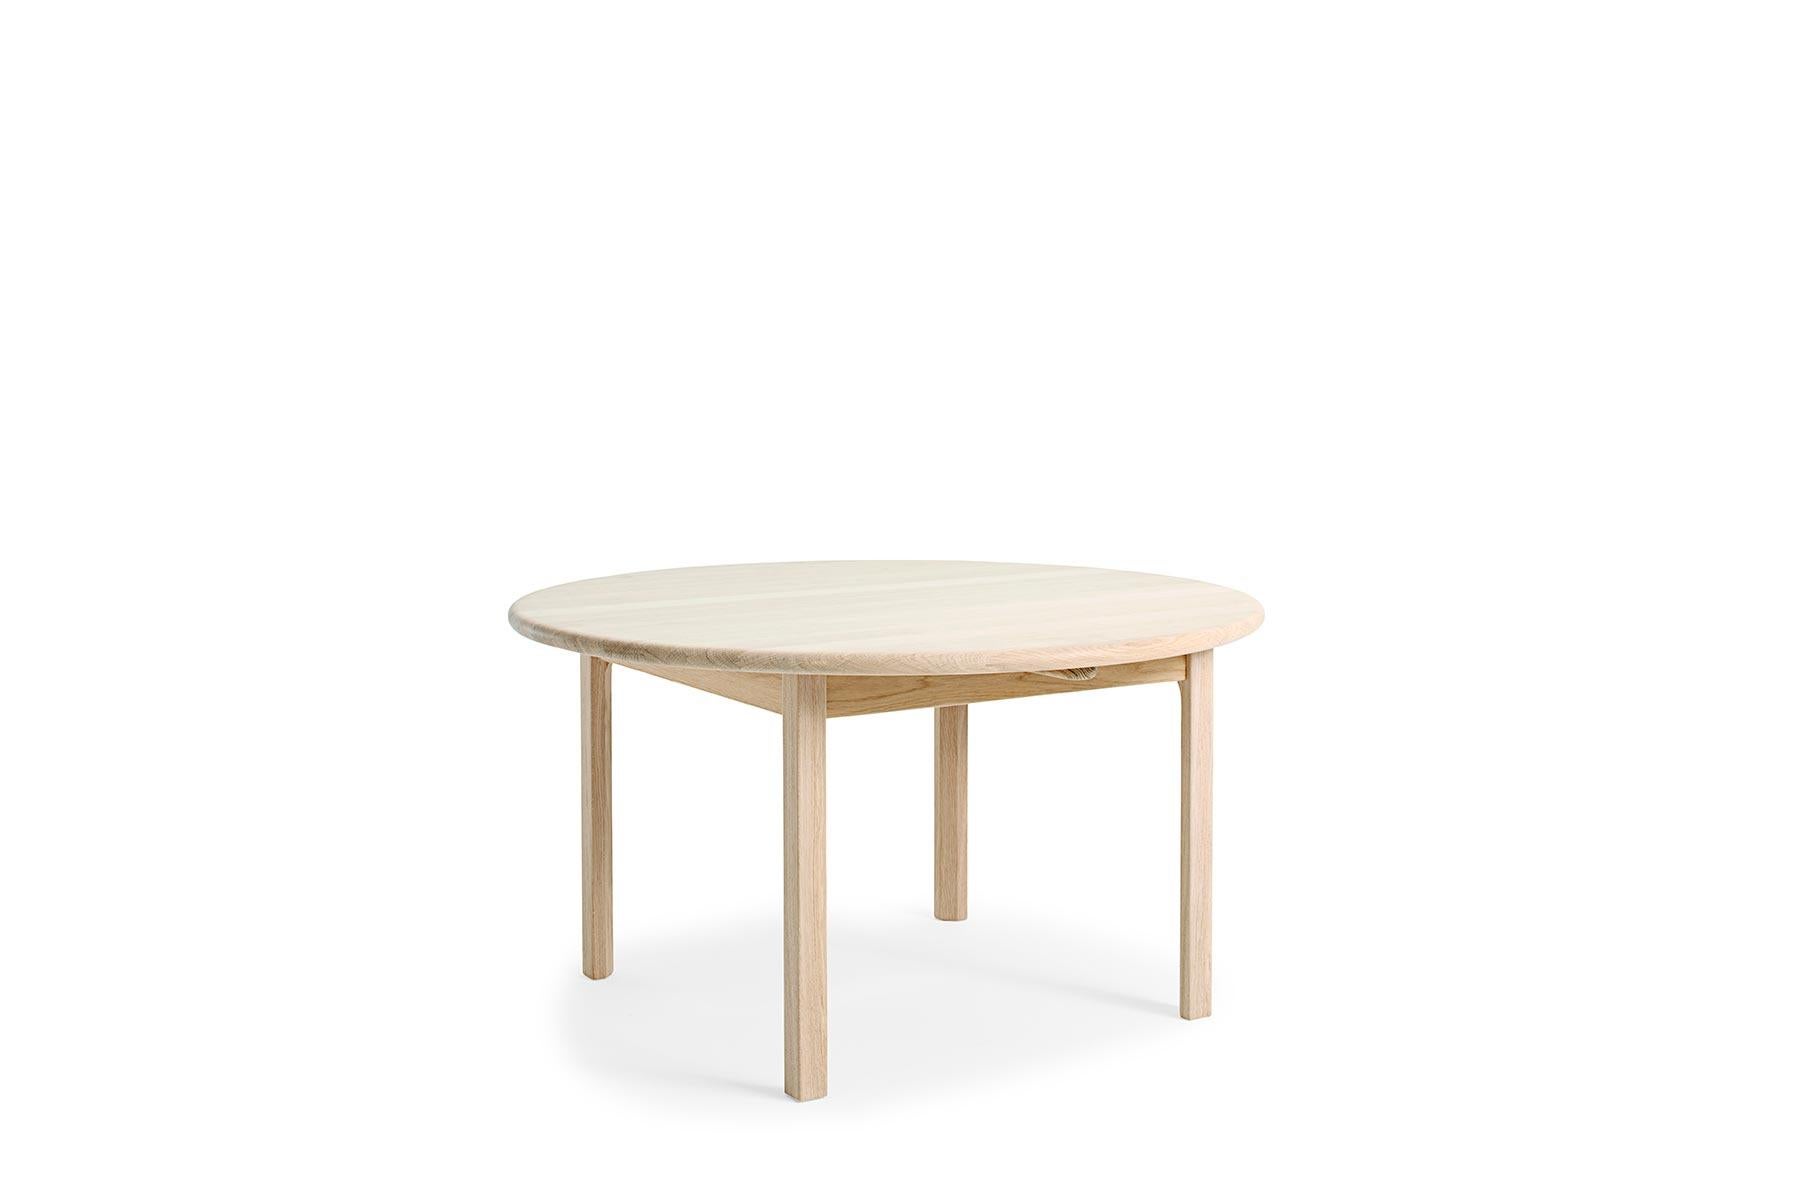 Designed by Hans Wegner for GETAMA in 1980, the 83/88 coffee table features unparalleled craftsmanship. This table is hand built at GETAMA’s factory in Gedsted, Denmark by skilled cabinetmakers using traditional Scandinavian techniques.

Lead